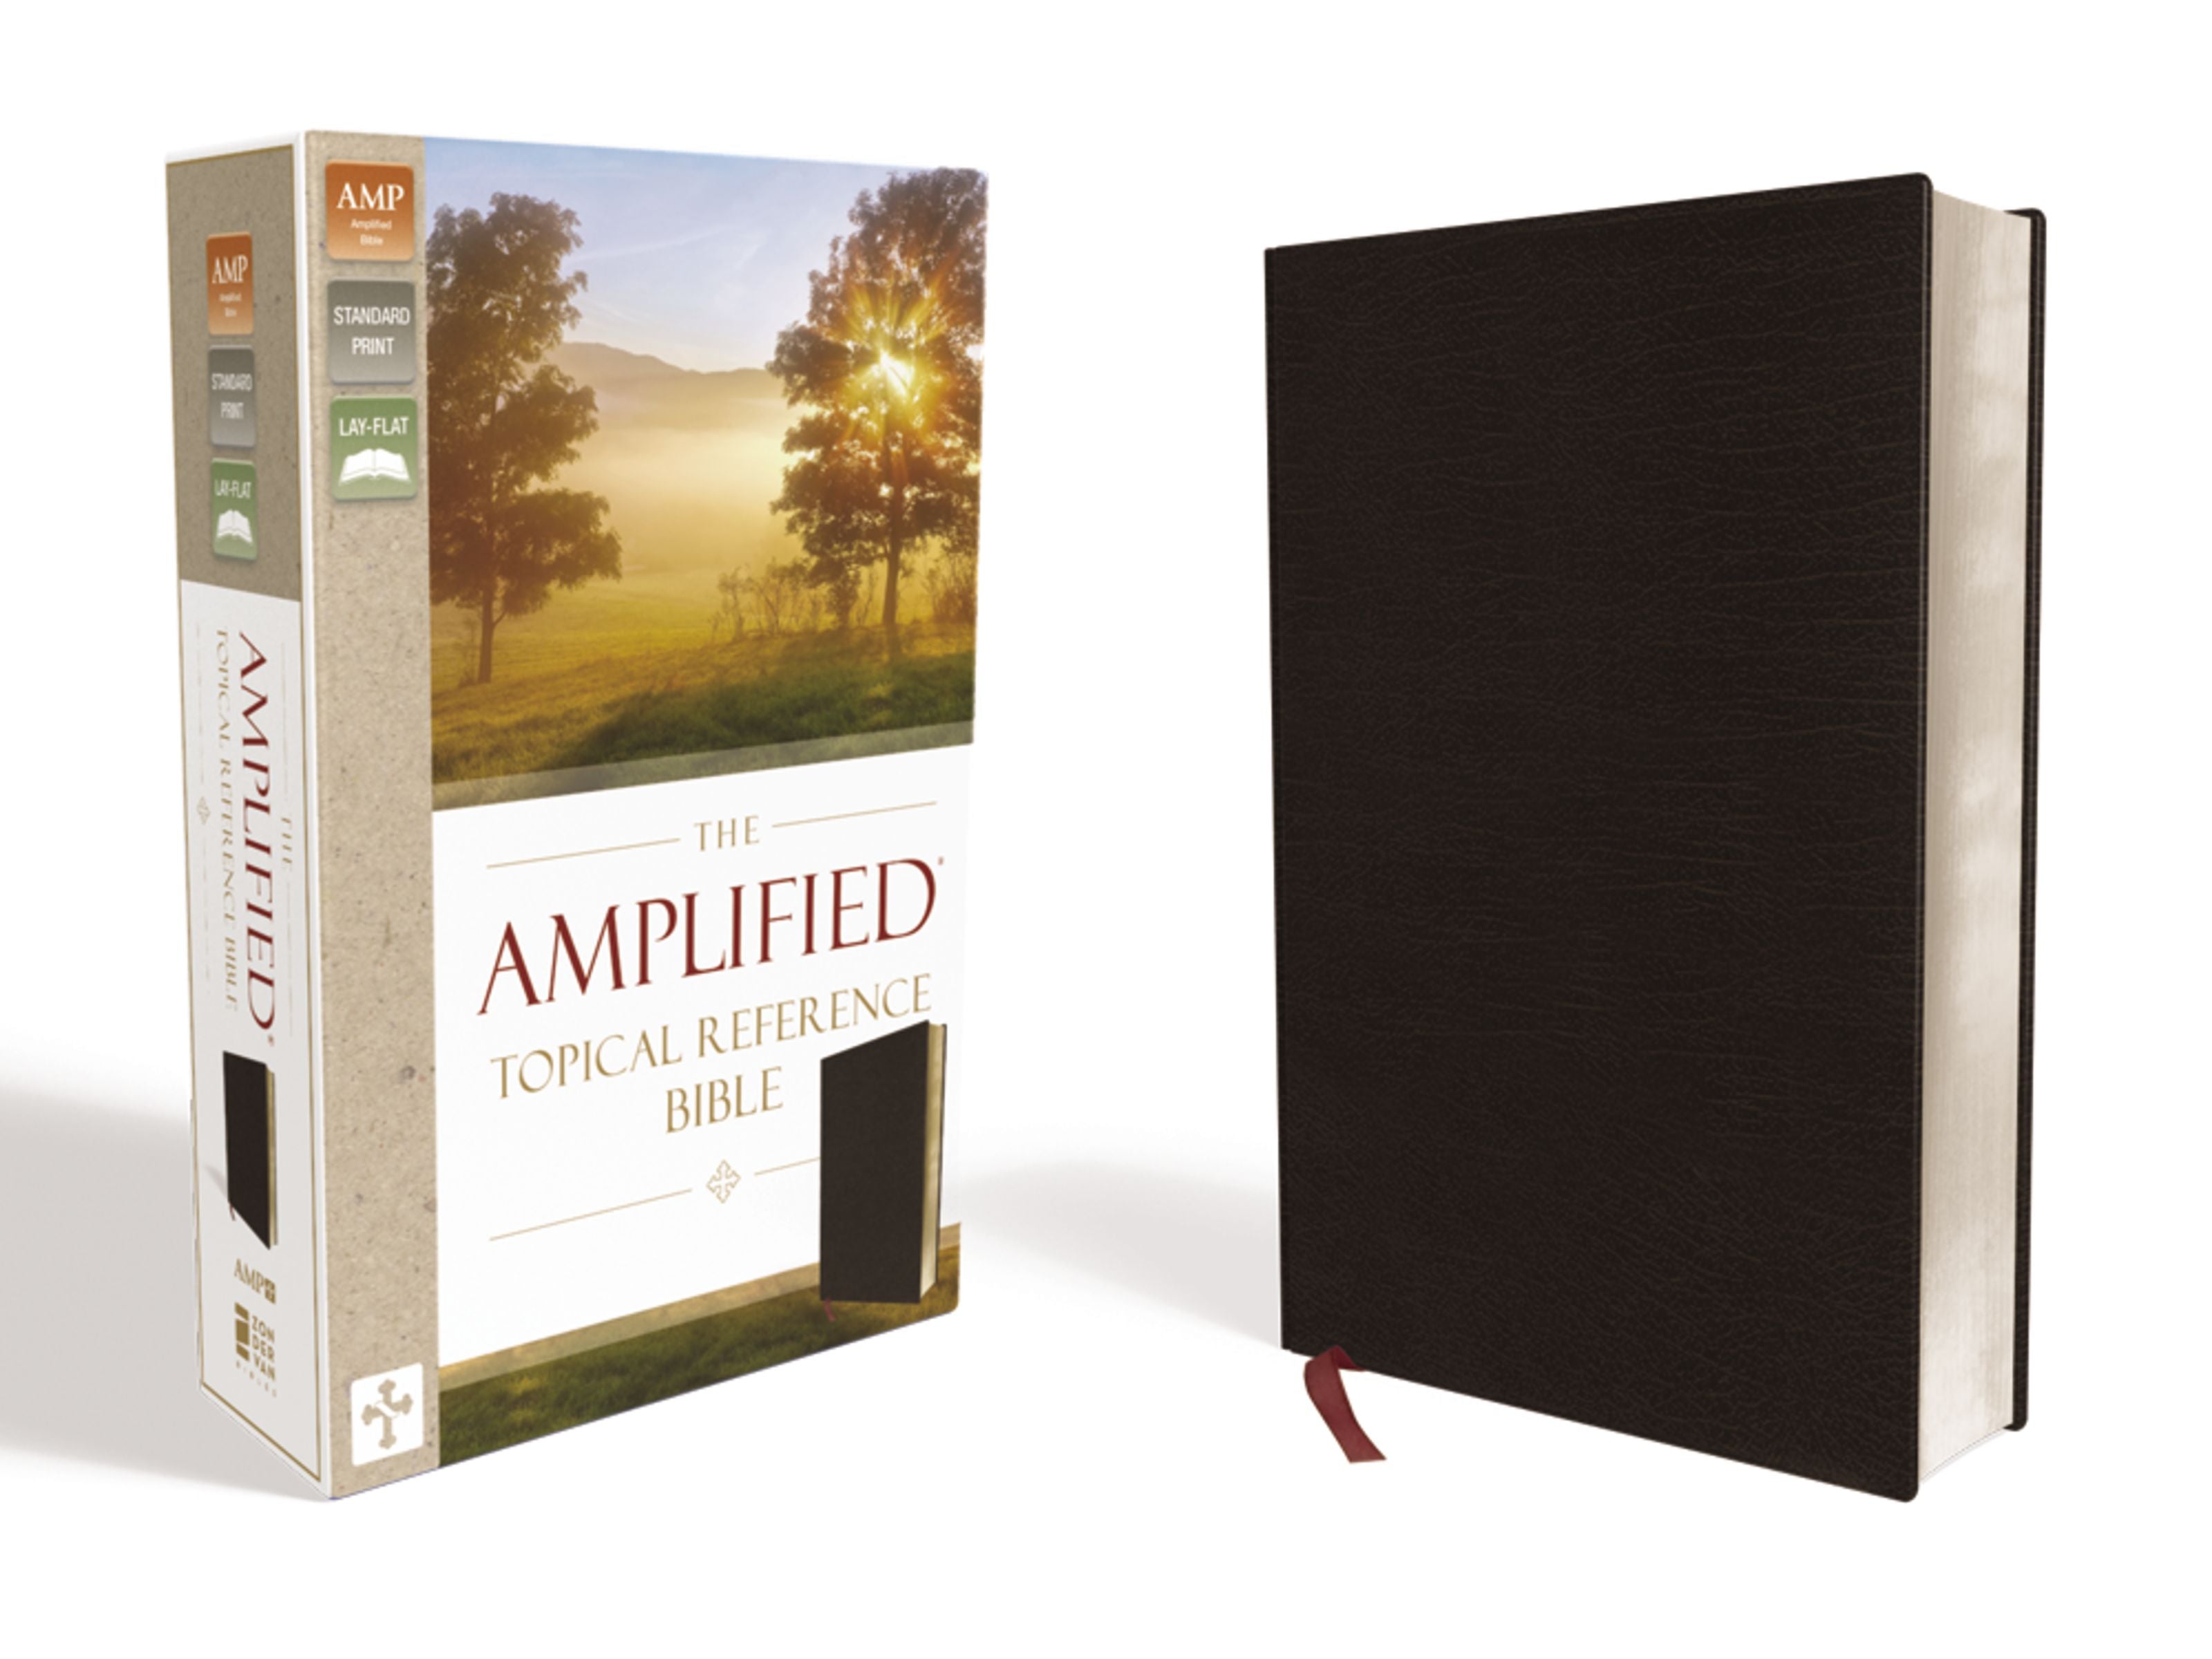 Image of Amplified Topical Reference Bible other